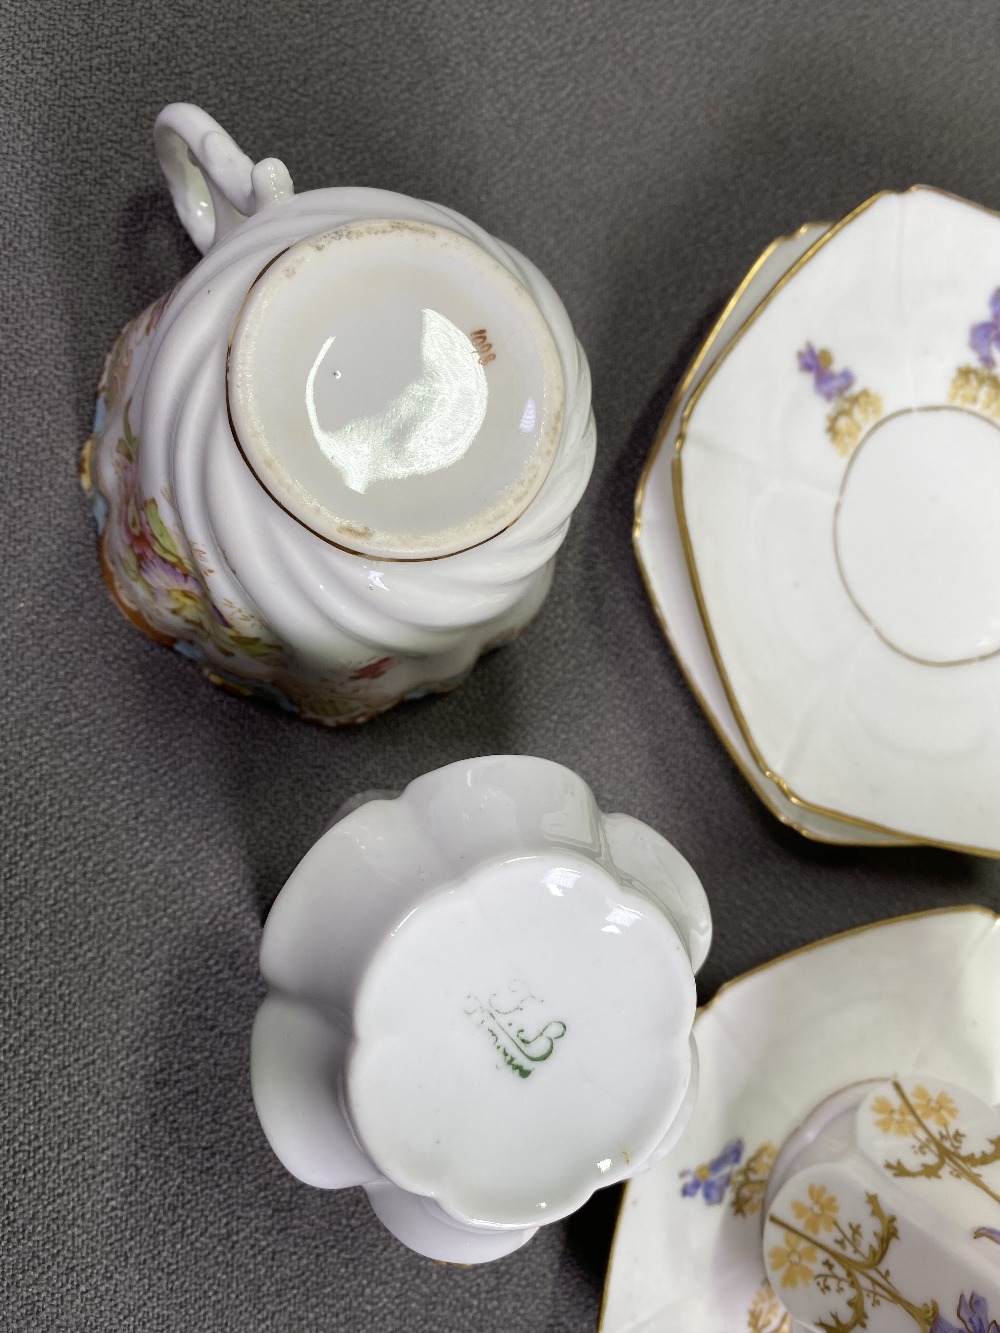 S.C.C STAFFORDSHIRE TEAWARE, nineteen pieces, also Limoges teaware, six pieces - Image 2 of 2